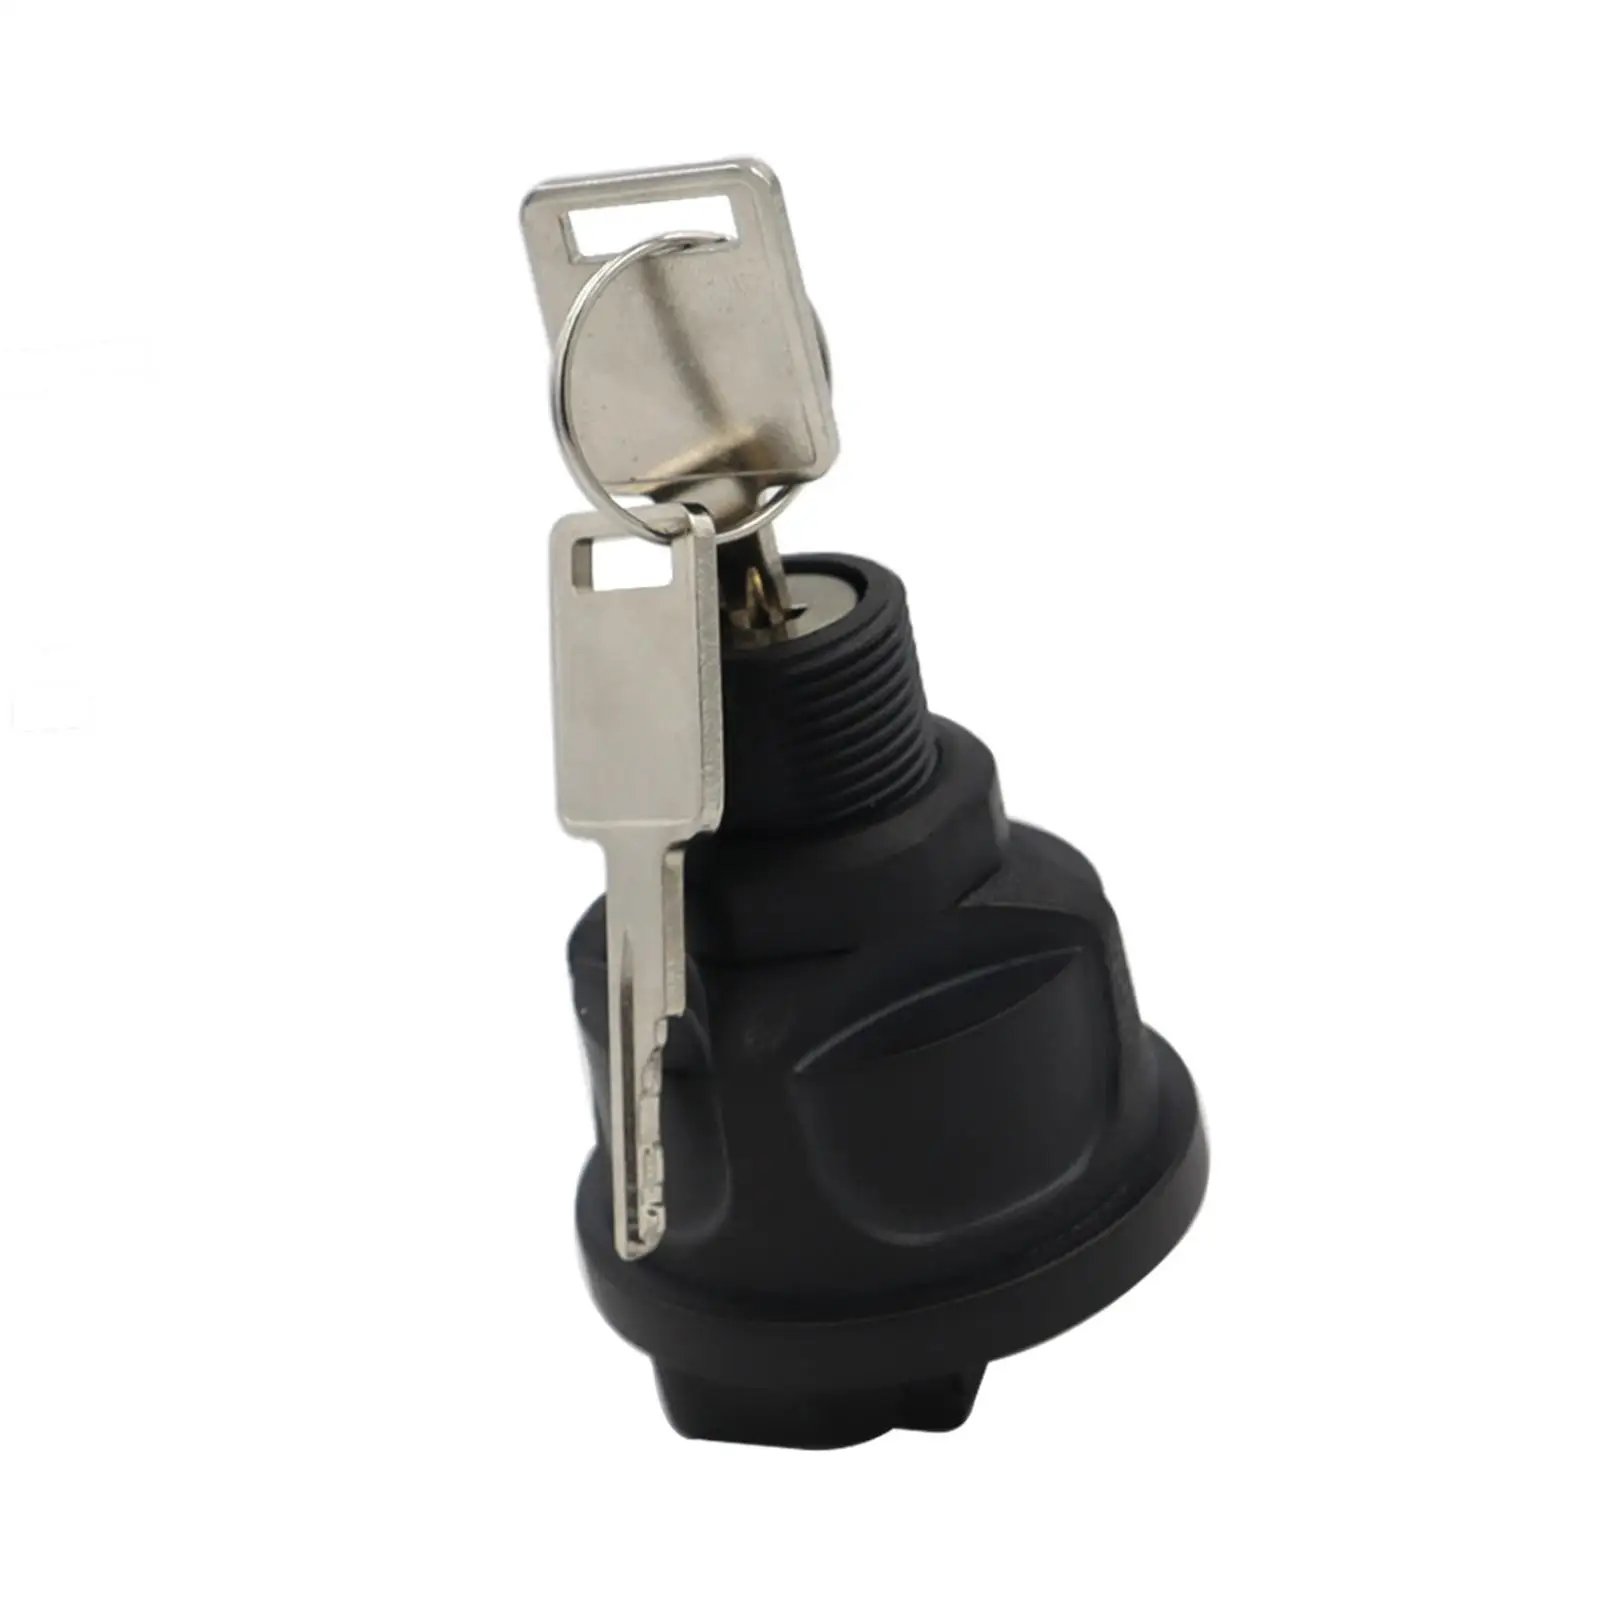 Ignition Key Switch Replacement for Bobcat Loaders S550 S185 Excavators